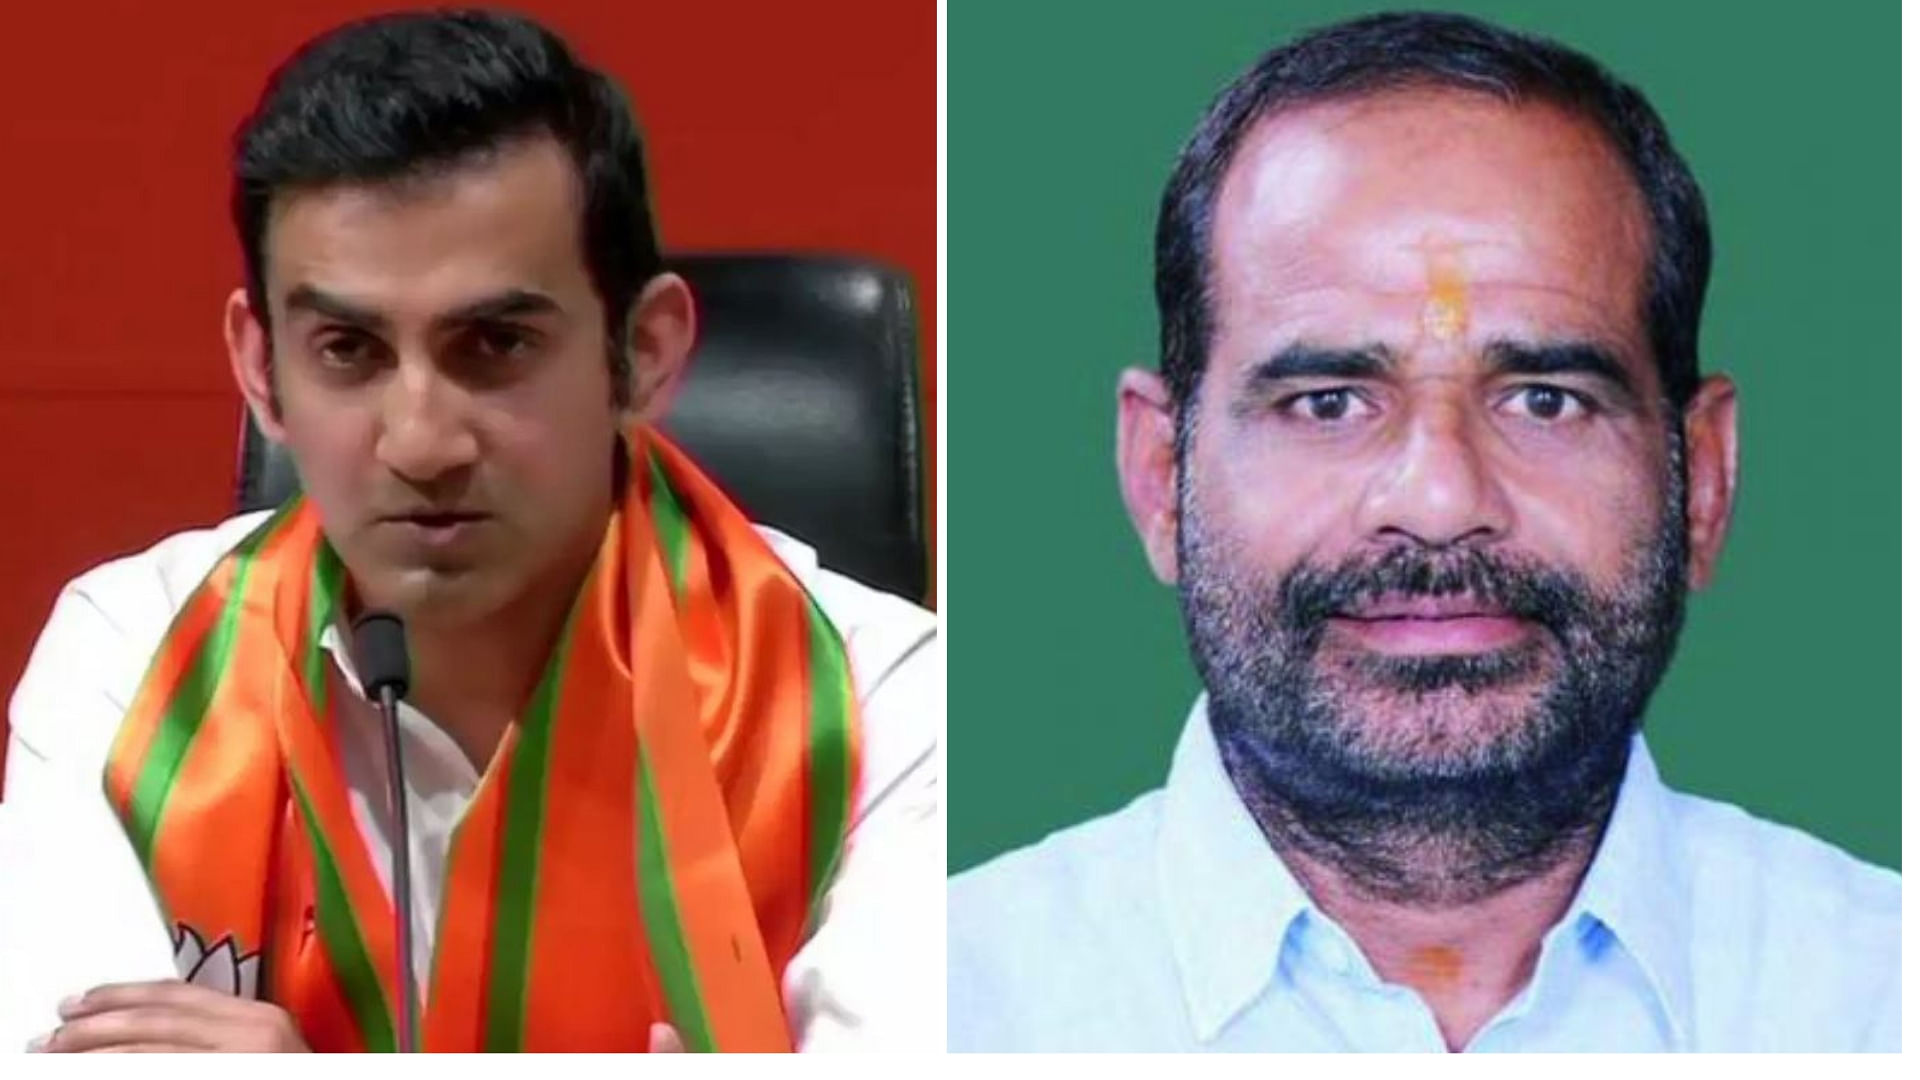 The AAP on Wednesday raised objections on nominations filed by two BJP candidates - sitting South Delhi MP Ramesh Bidhuri and East Delhi contestant Gautam Gambhir, alleging that there were “shortcomings” in the documents submitted by them.